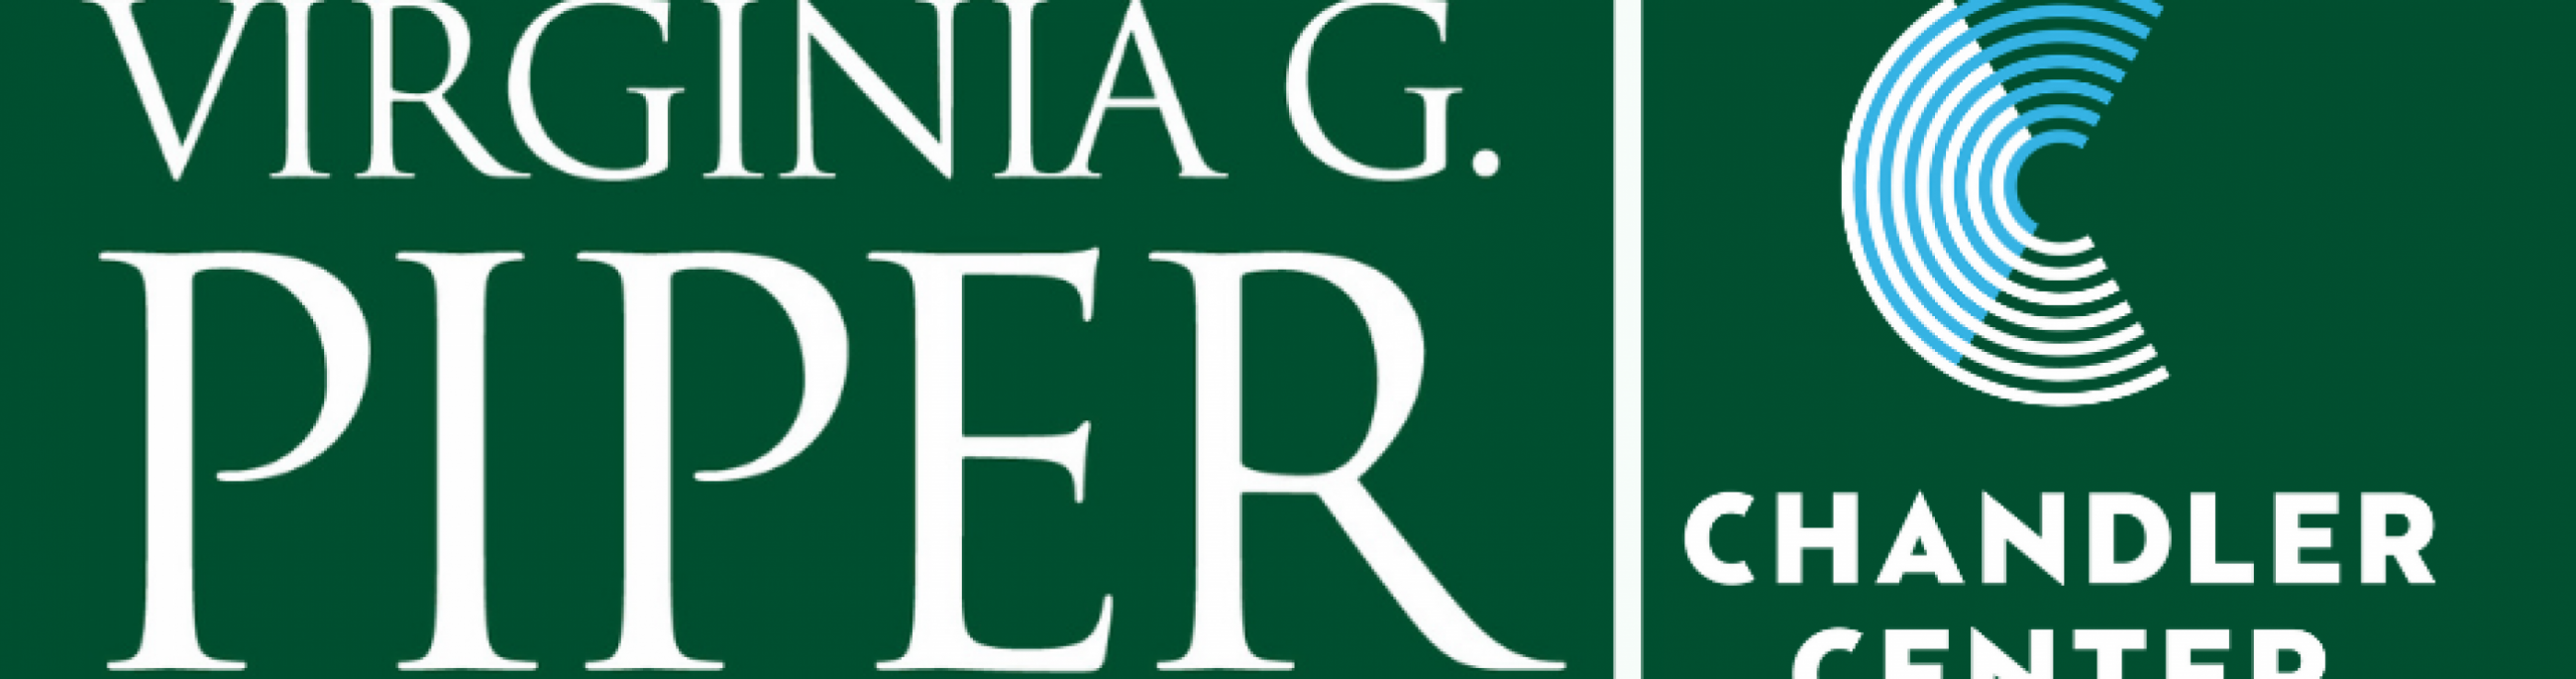 White logos for Virginia G Piper and Chandler Center for the Arts on a forest green background.